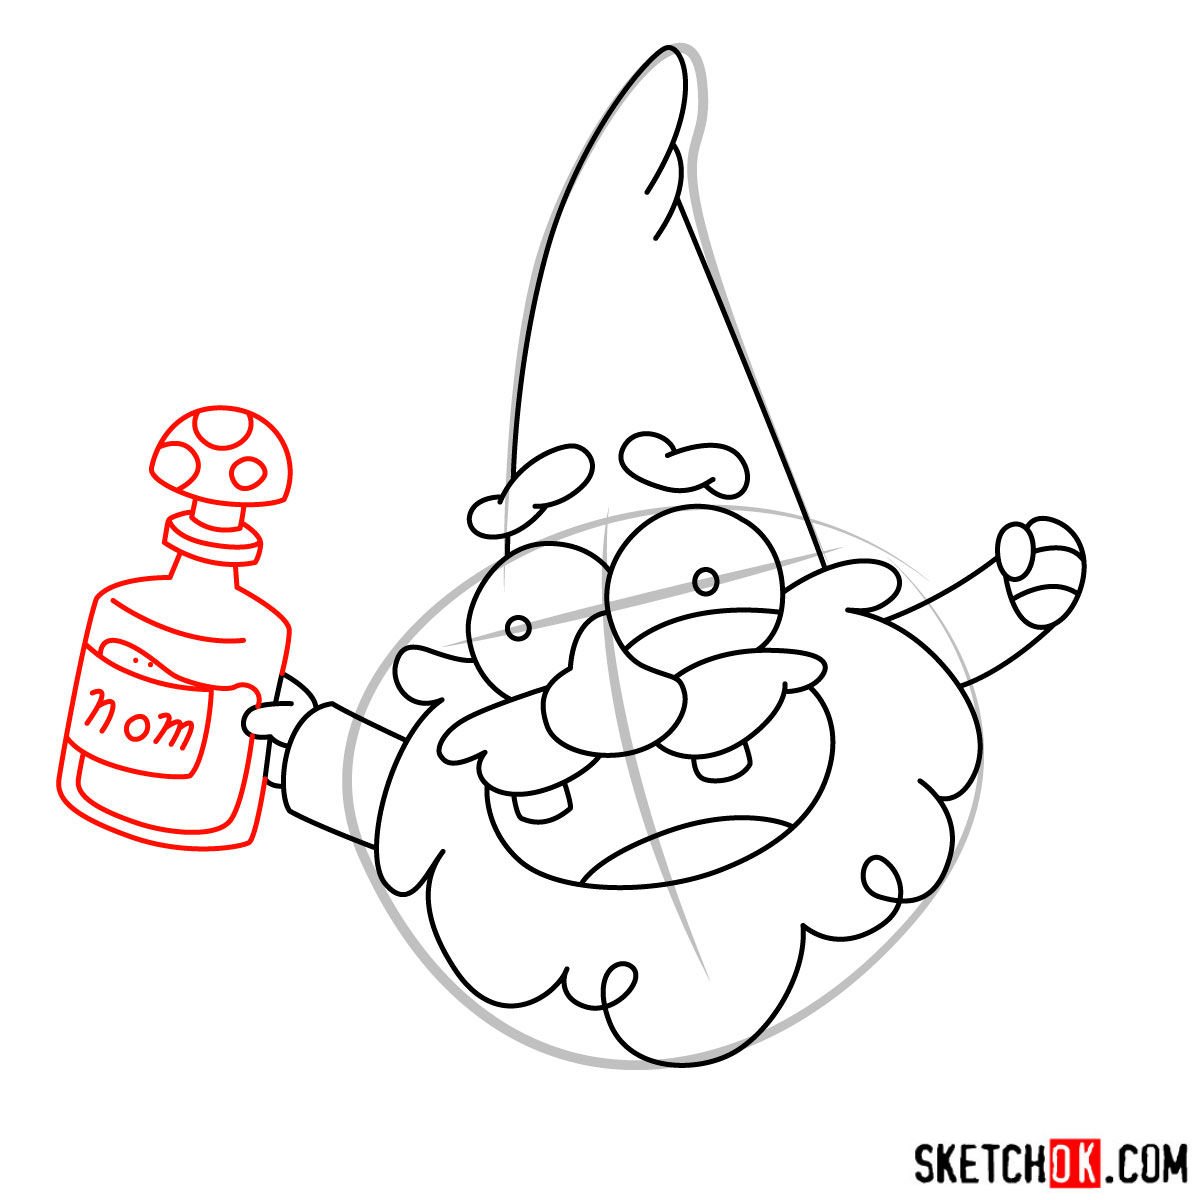 How to draw Gnome from Gravity Falls - step 07